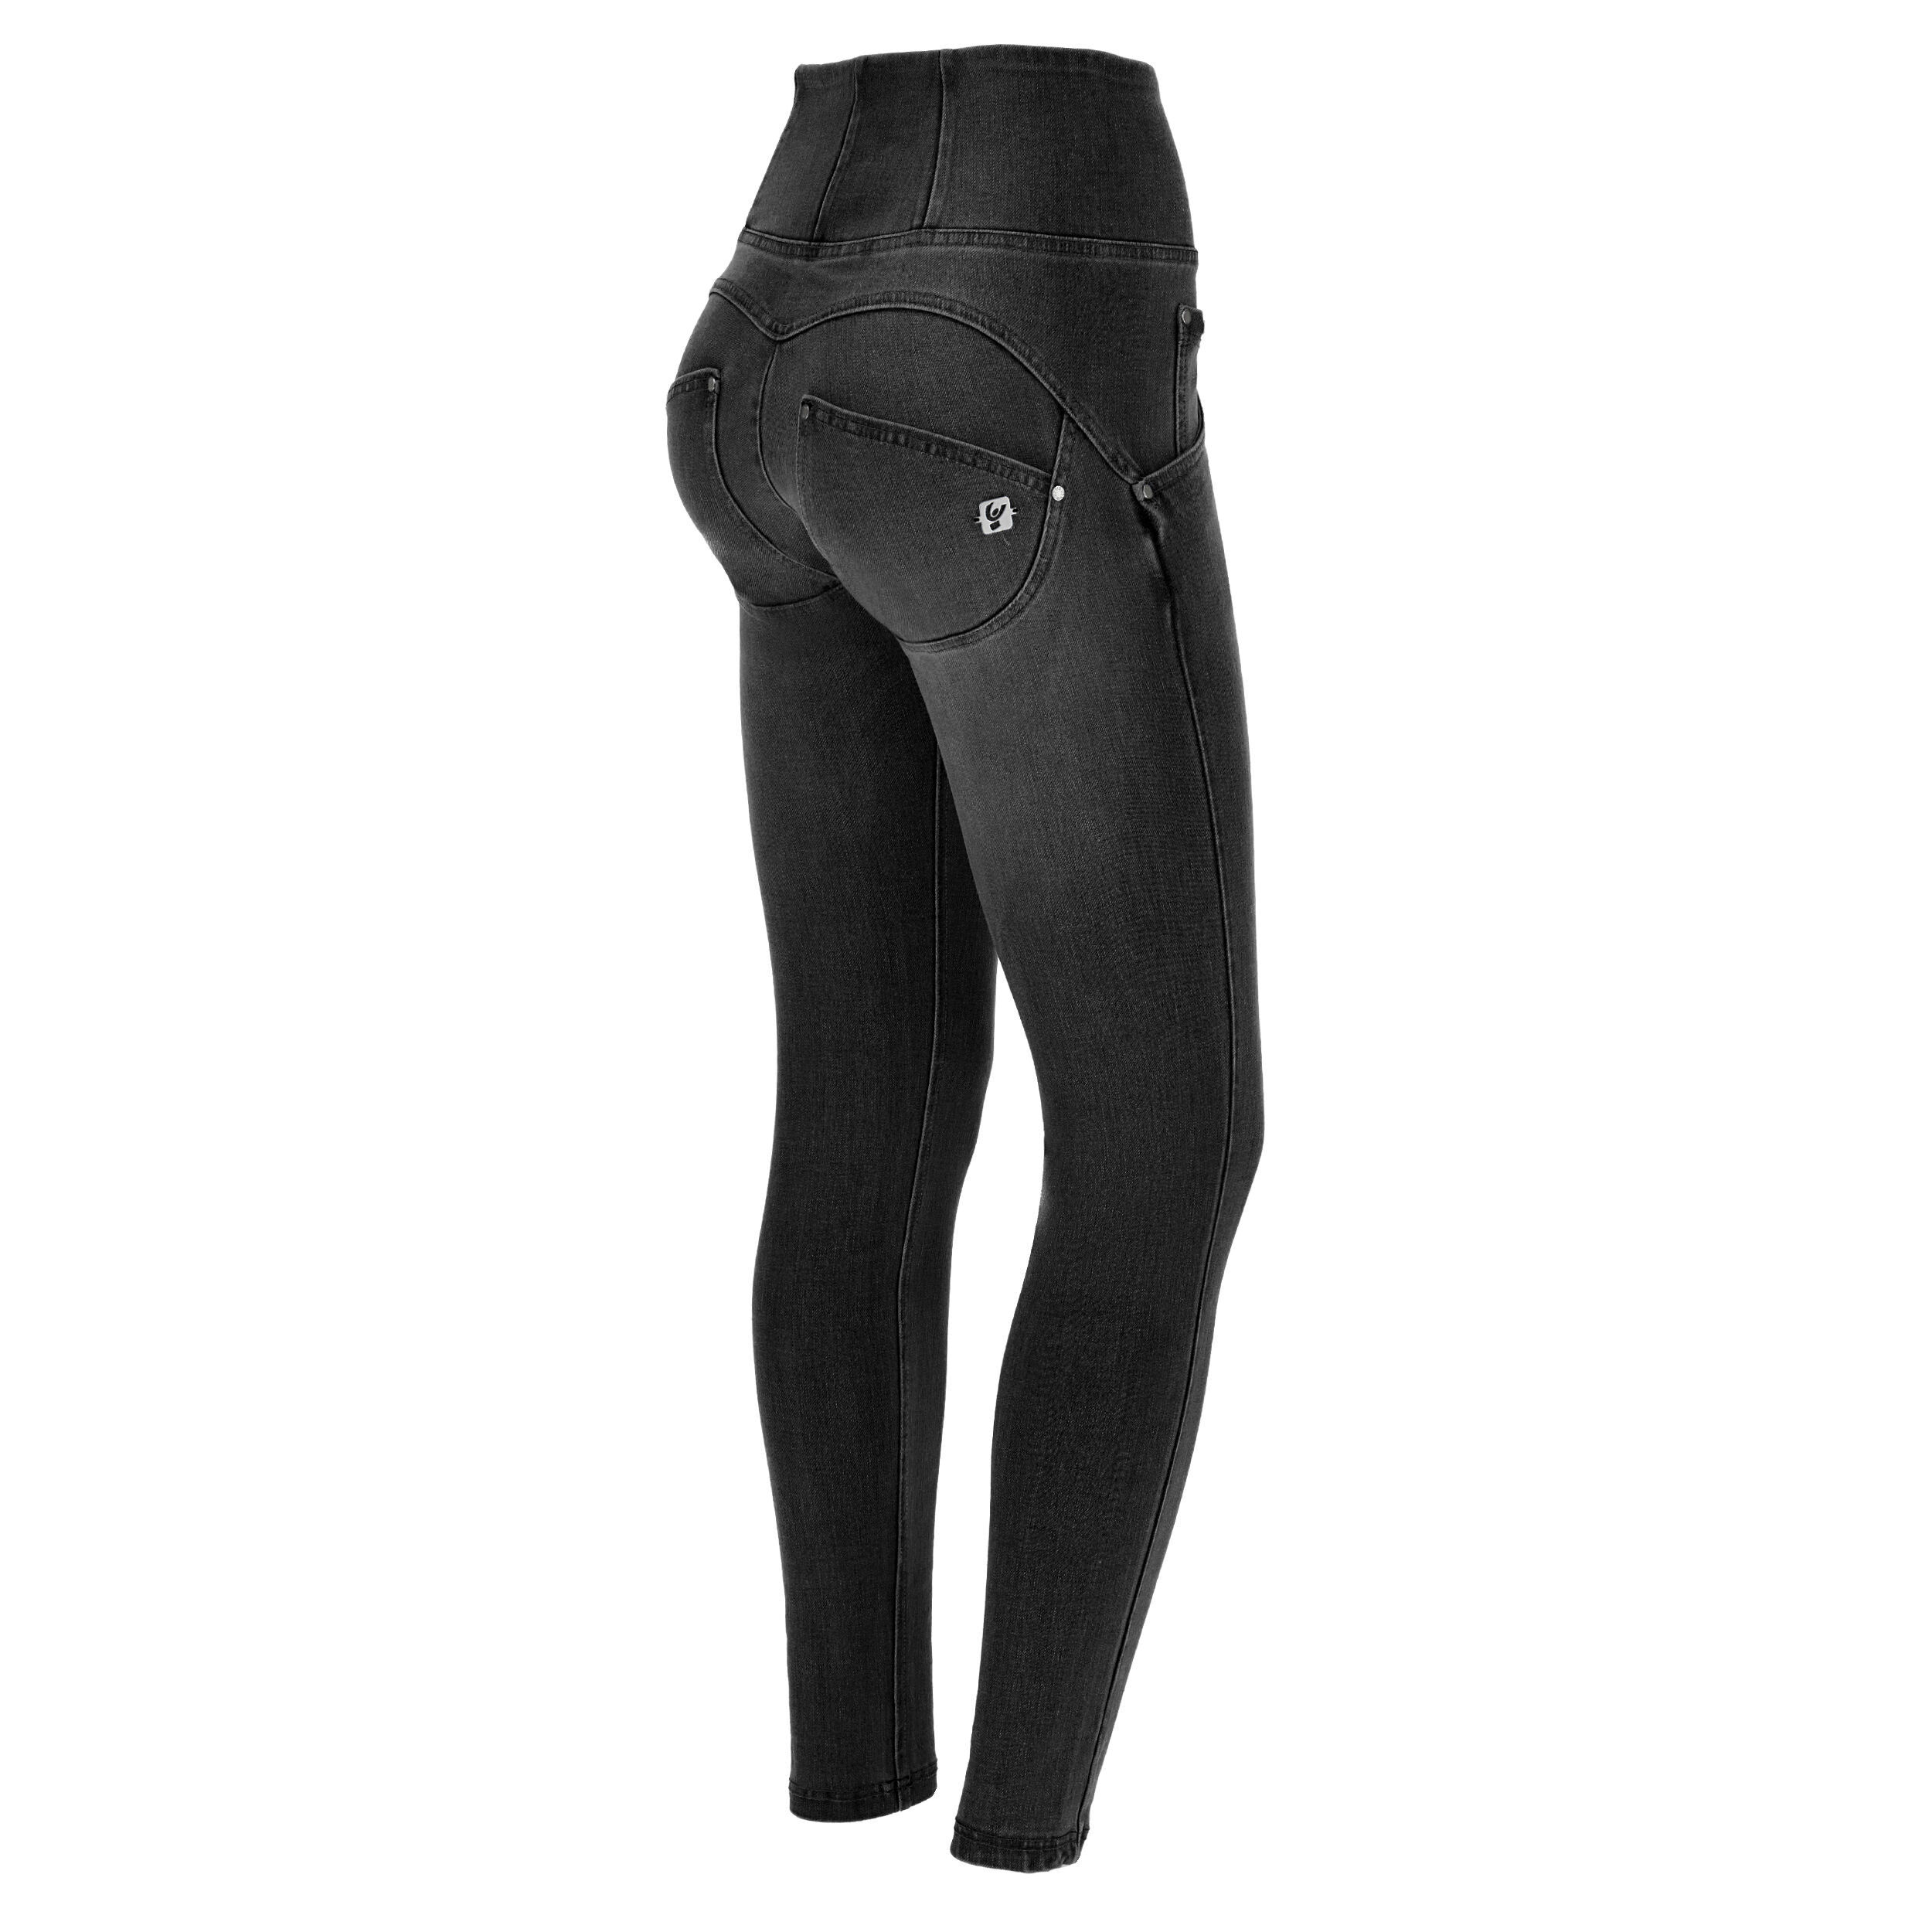 freddy jeans push up wr.up® vita alta superskinny denim navetta ecologico jeans nero-cuciture in tono donna extra large